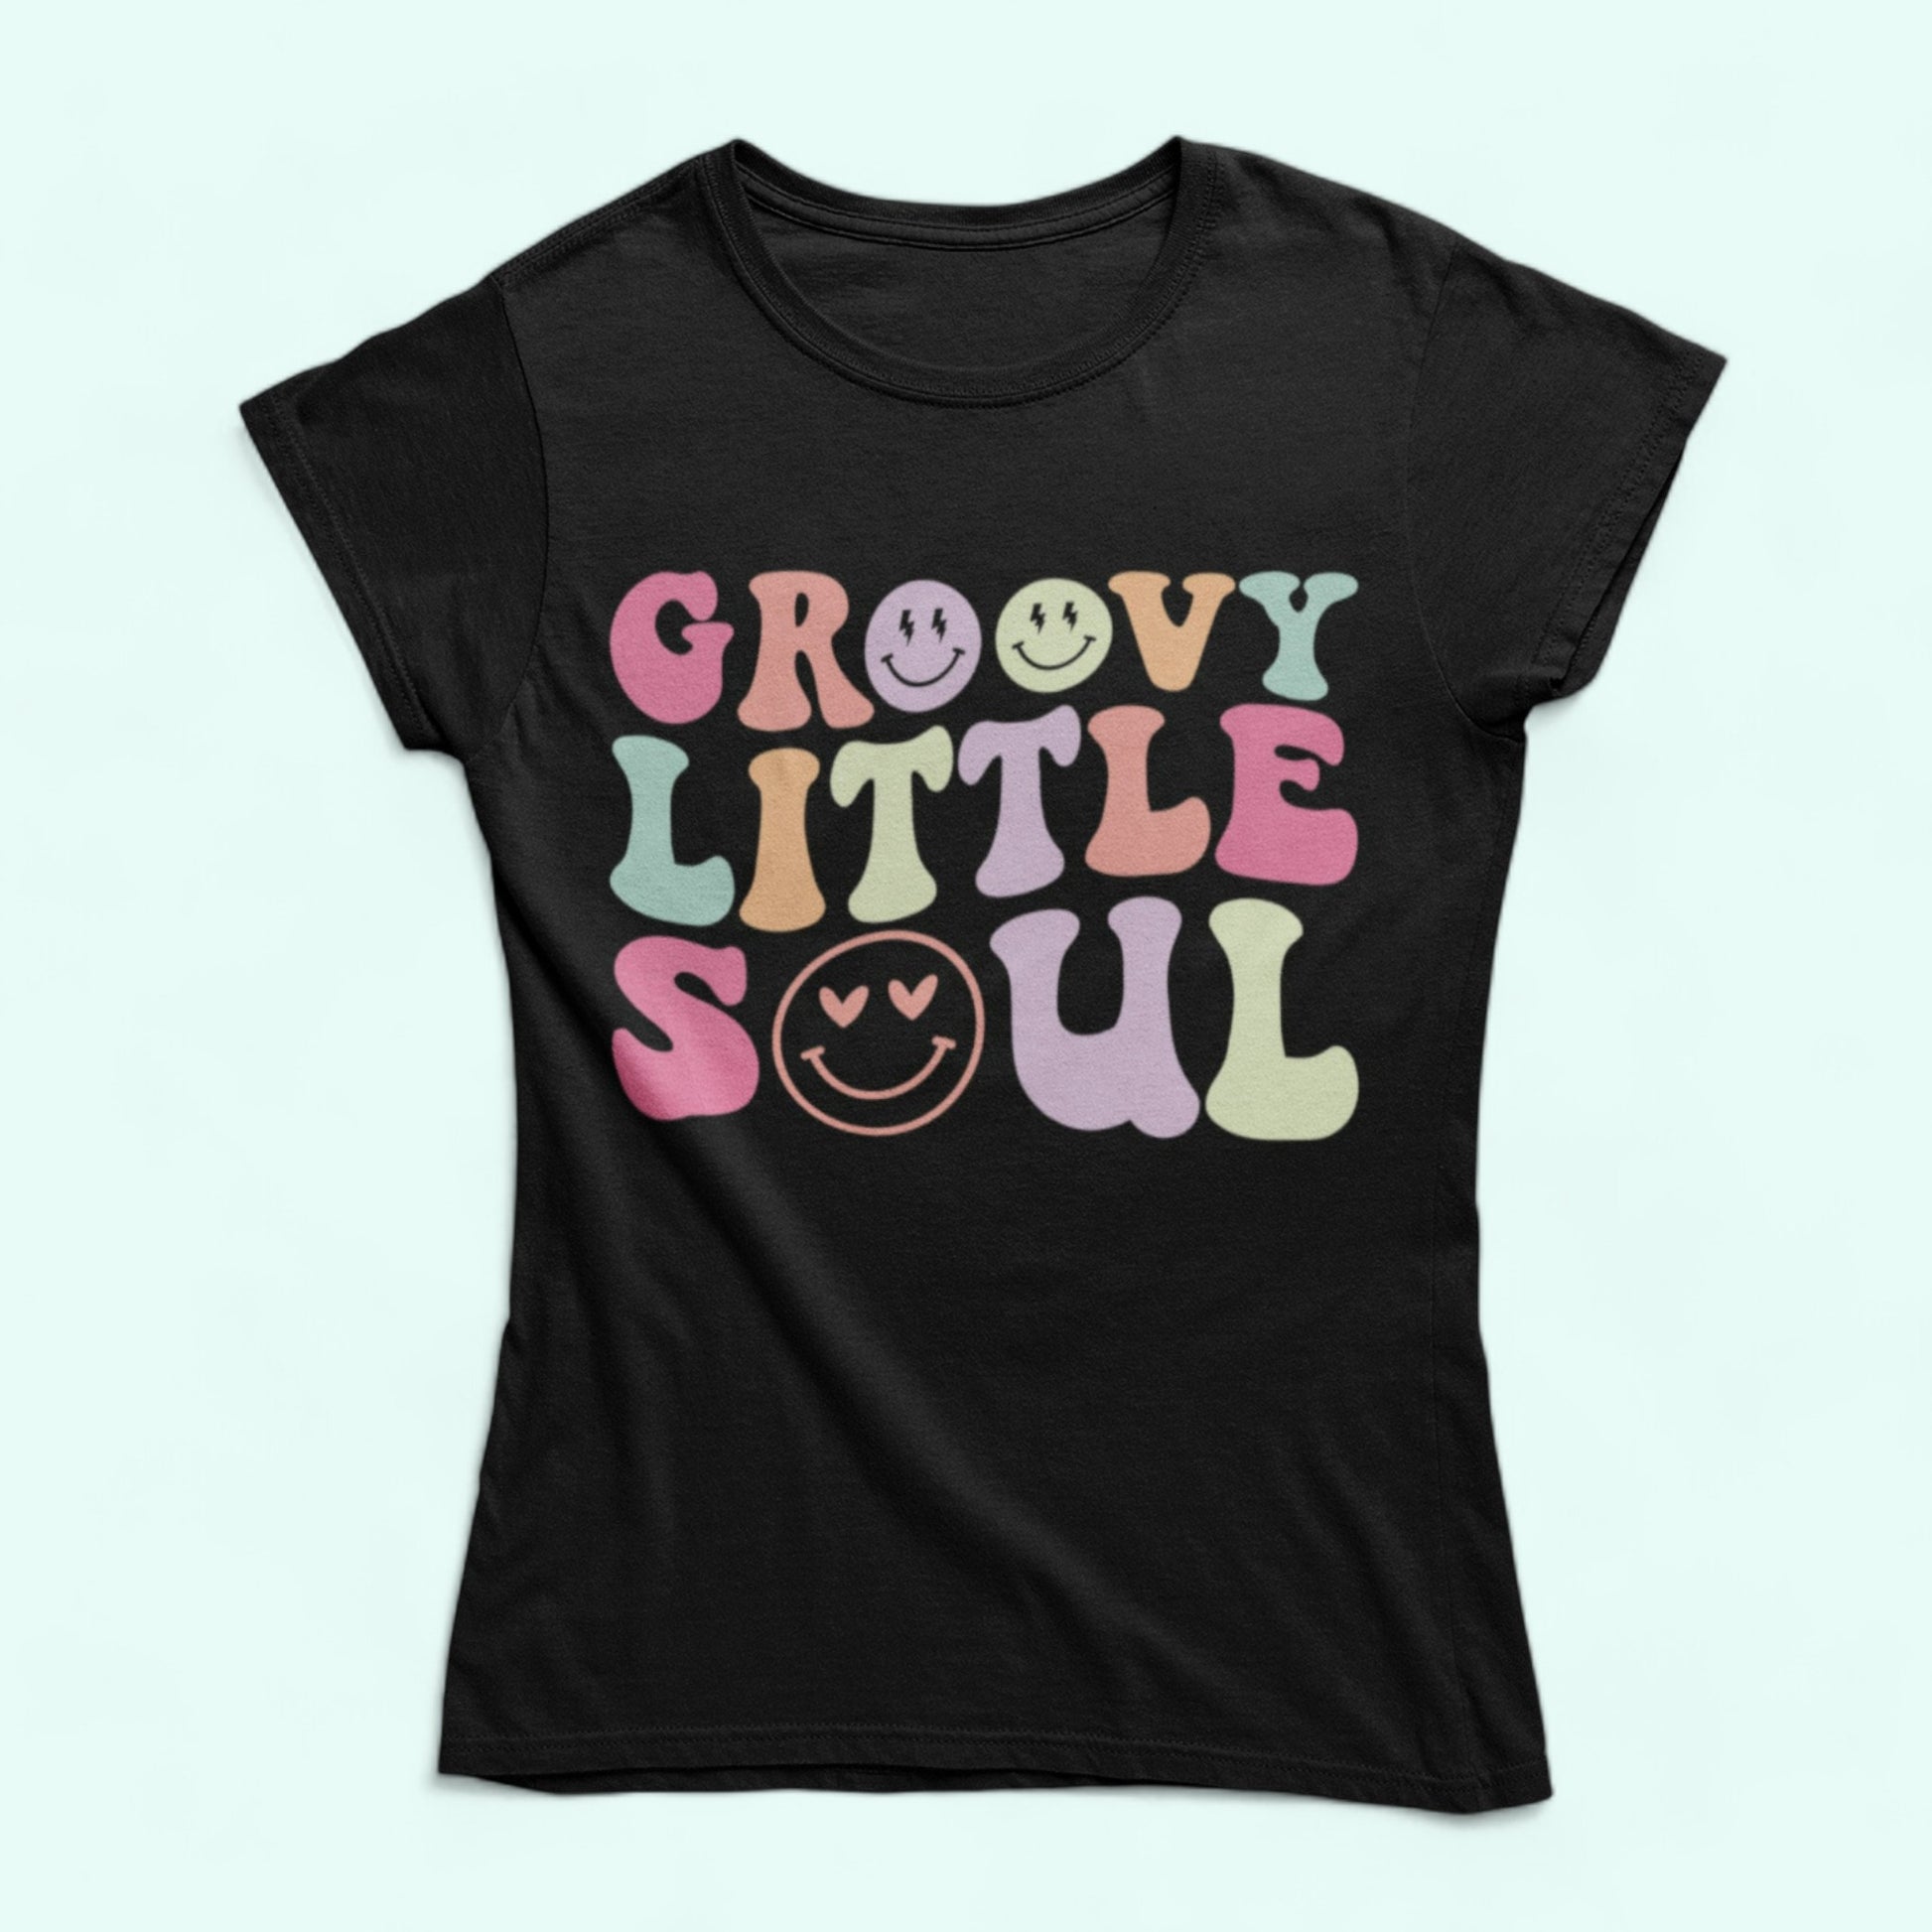 Groovy shirt  in black color 